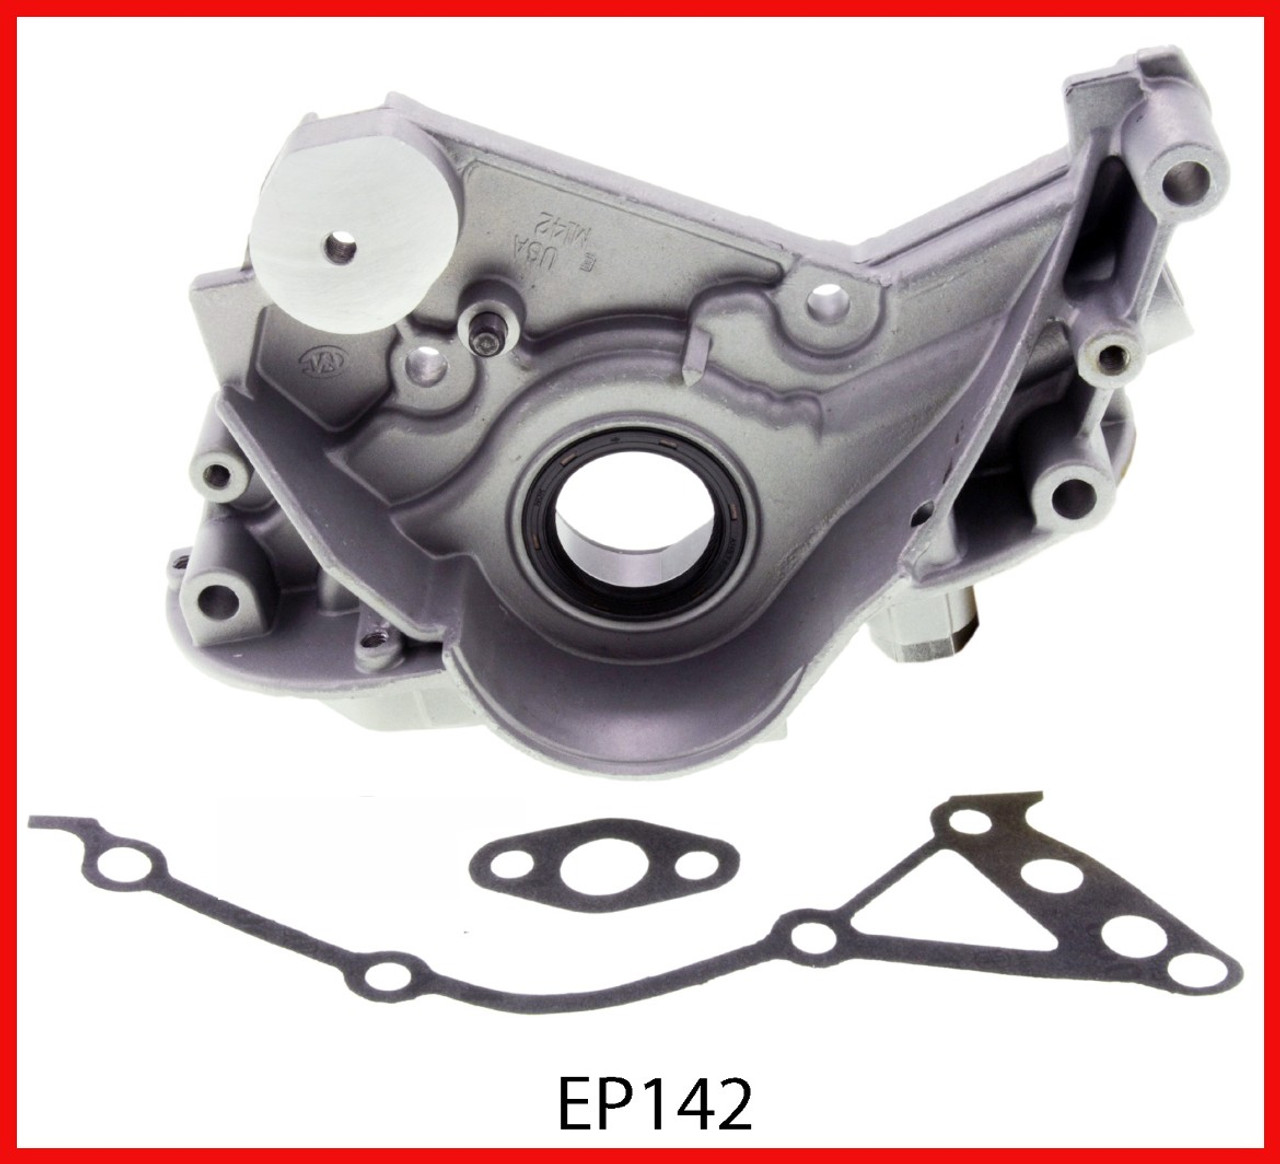 1993 Plymouth Grand Voyager 3.0L Engine Oil Pump EP142 -57